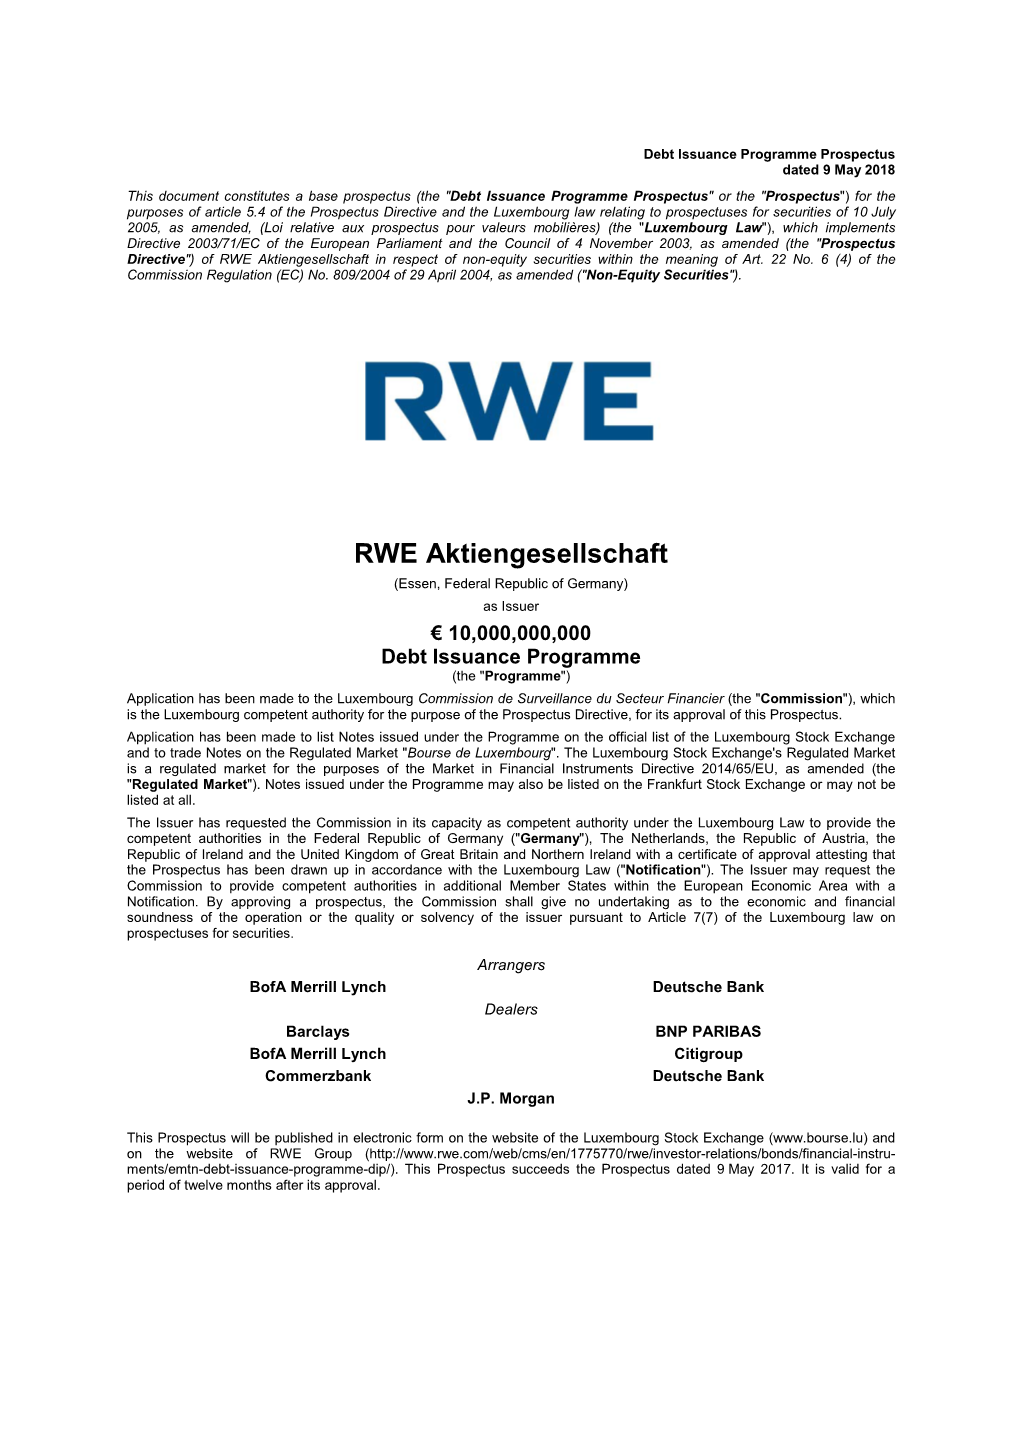 RWE Aktiengesellschaft in Respect of Non-Equity Securities Within the Meaning of Art